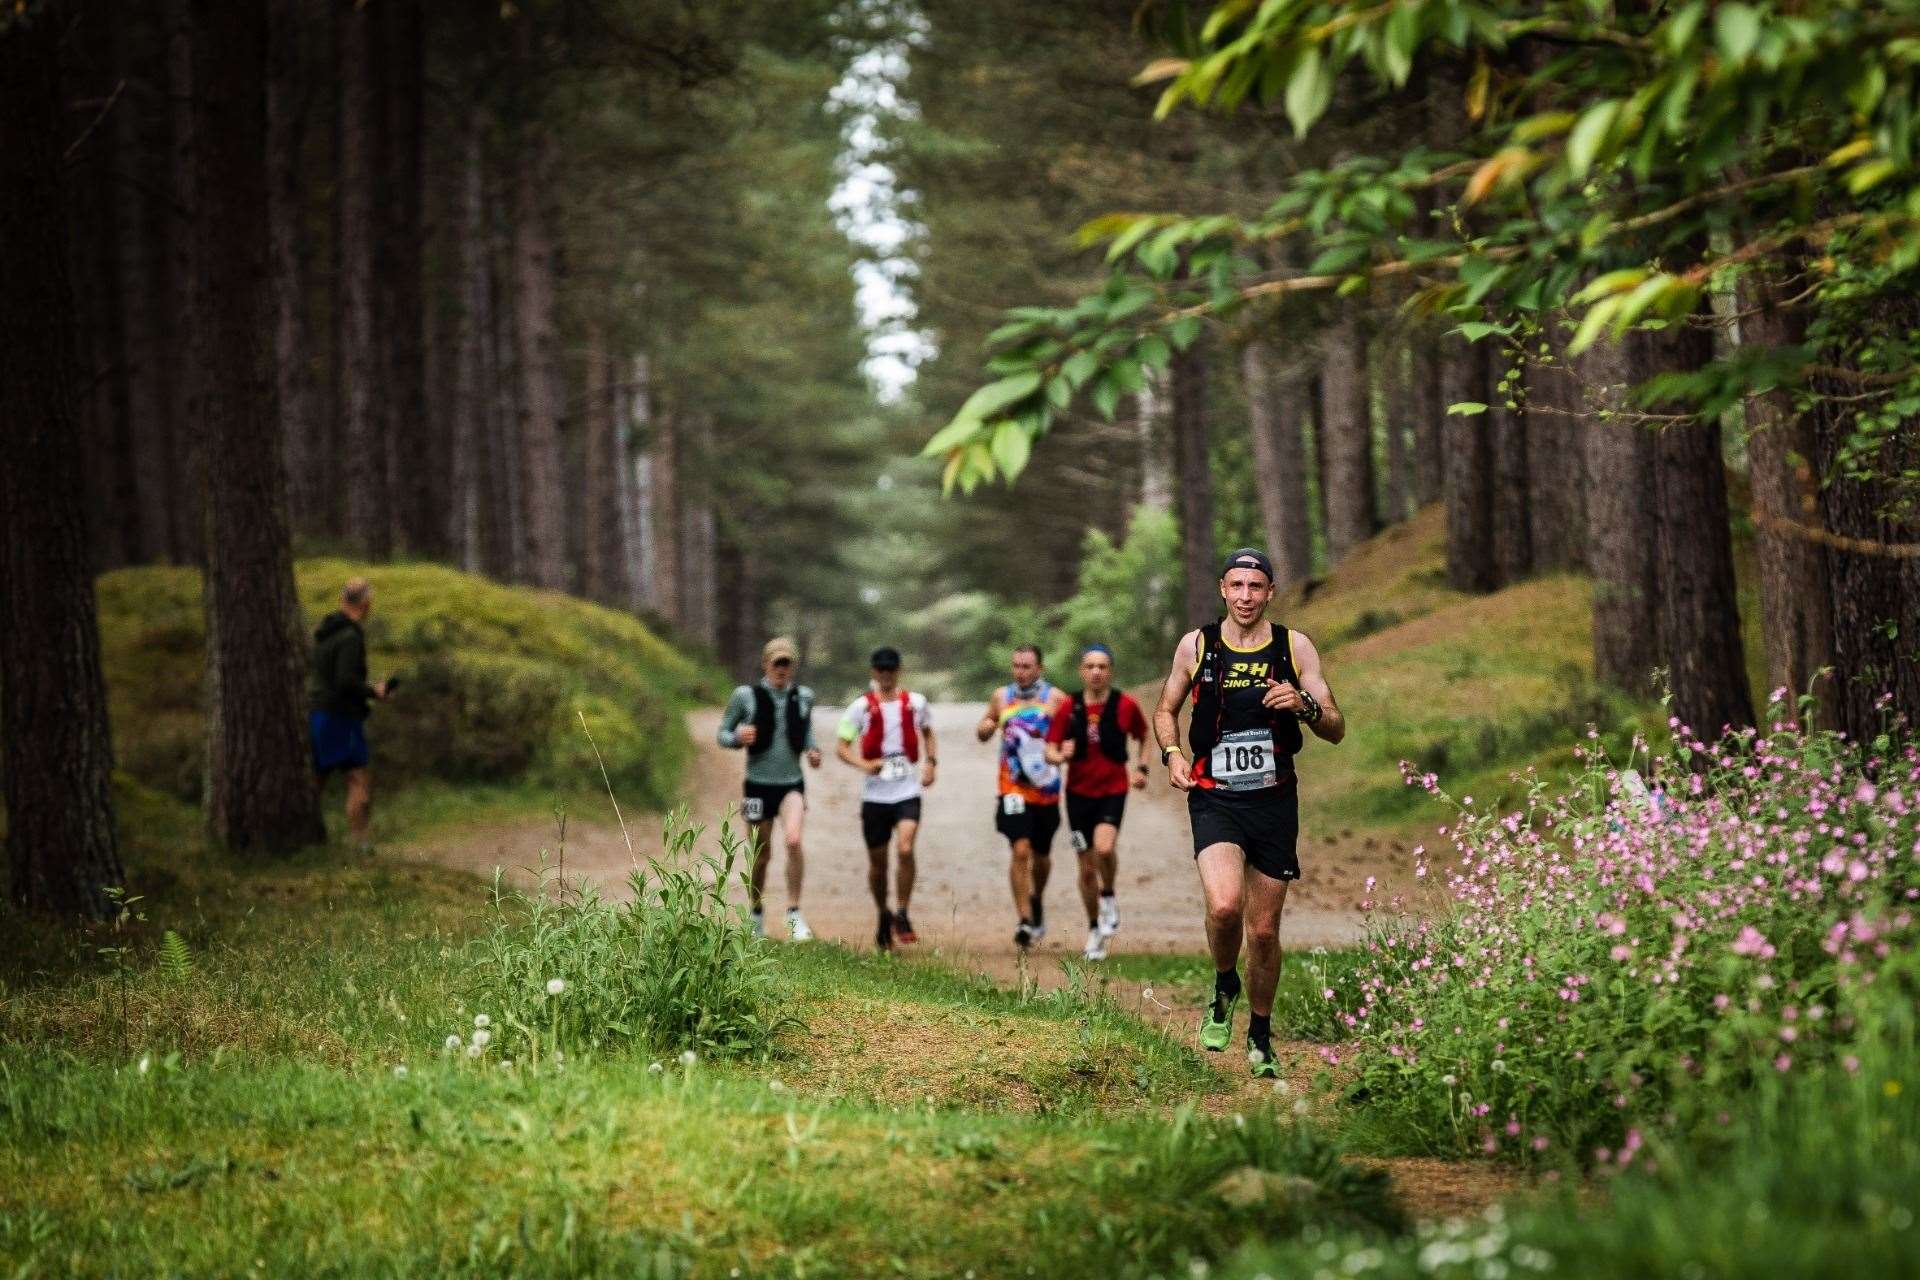 The Moray Coastal Trail 50 makes its way through the forest.